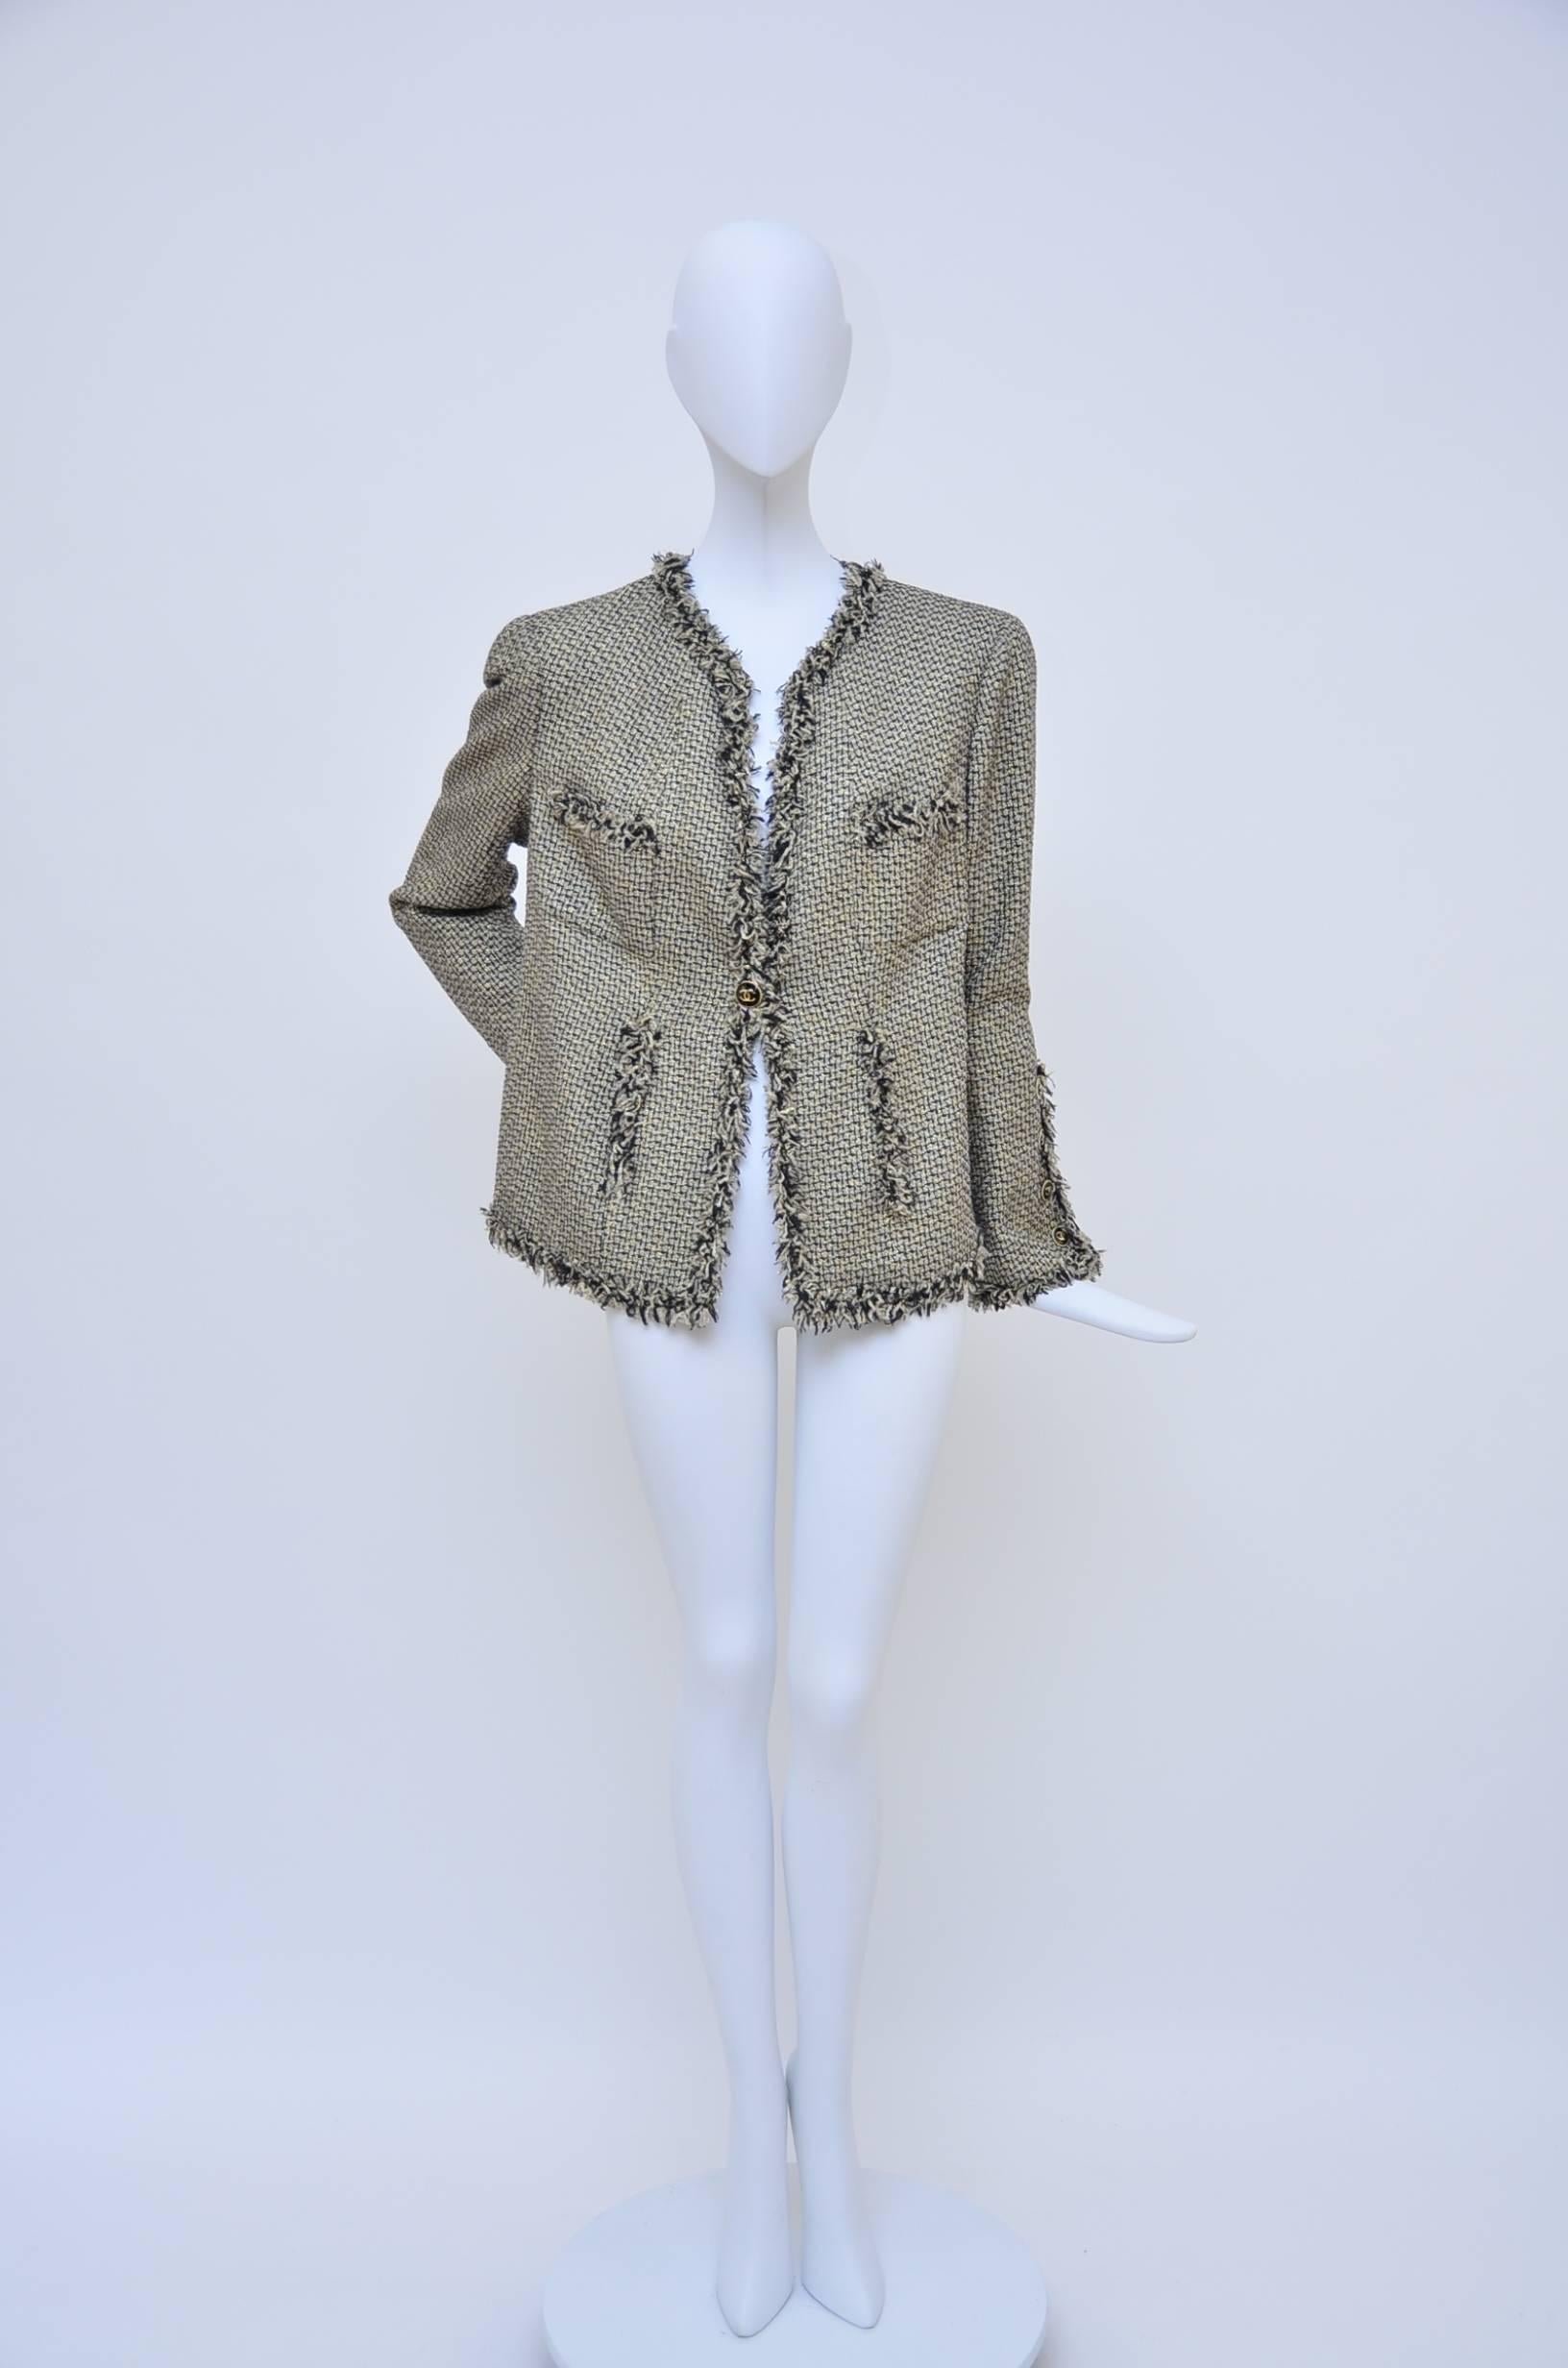 Chanel runway 2007 tweed jacket.
Excellent mint condition.
Made in France .
Size 46.
Approximate measure:
Underarm:38